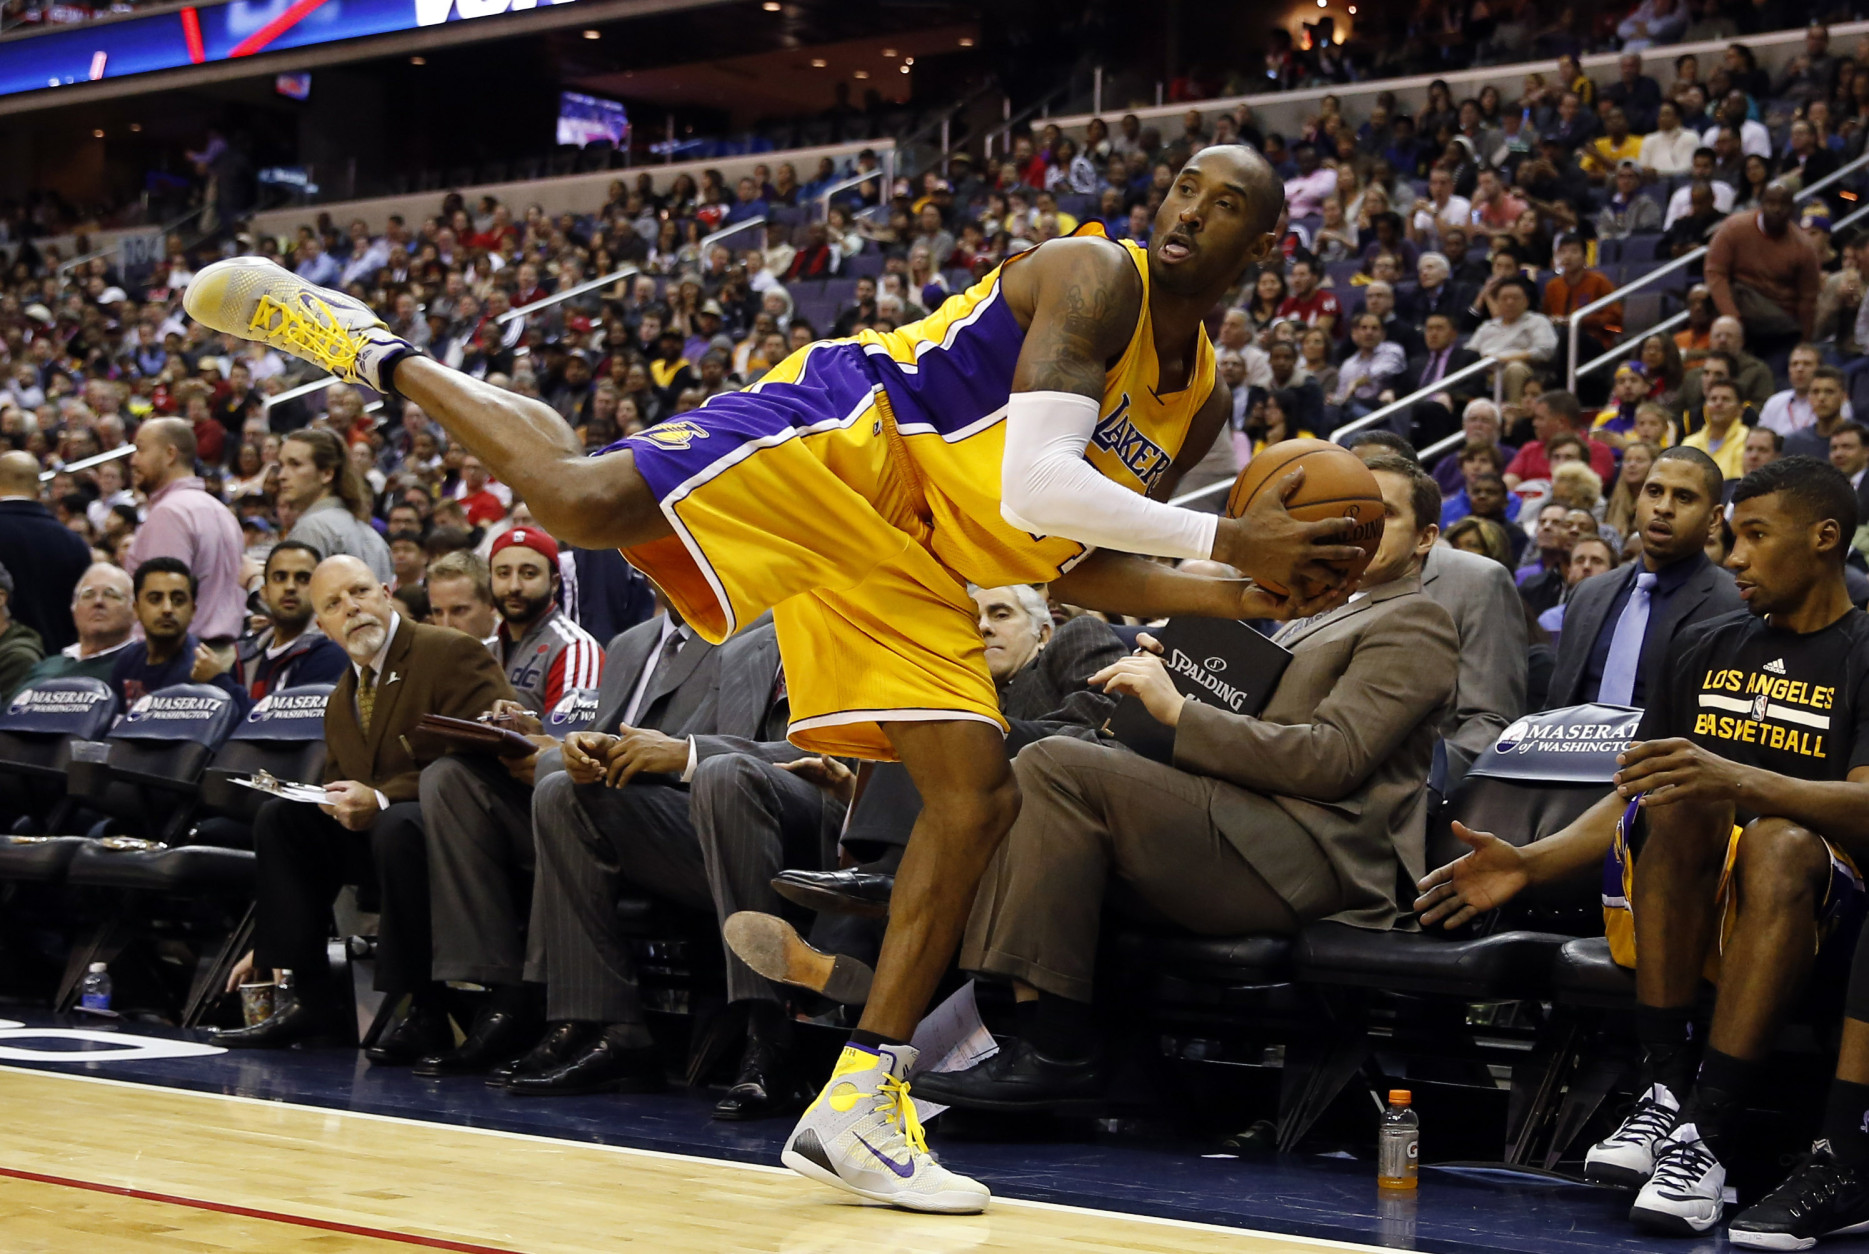 Los Angeles Lakers guard Kobe Bryant (24) balances on one foot as he saves the ball from going out of bounds in the second half of an NBA basketball game against the Washington Wizards, Wednesday, Dec. 3, 2014, in Washington. The Wizards won 111-95. (AP Photo/Alex Brandon)